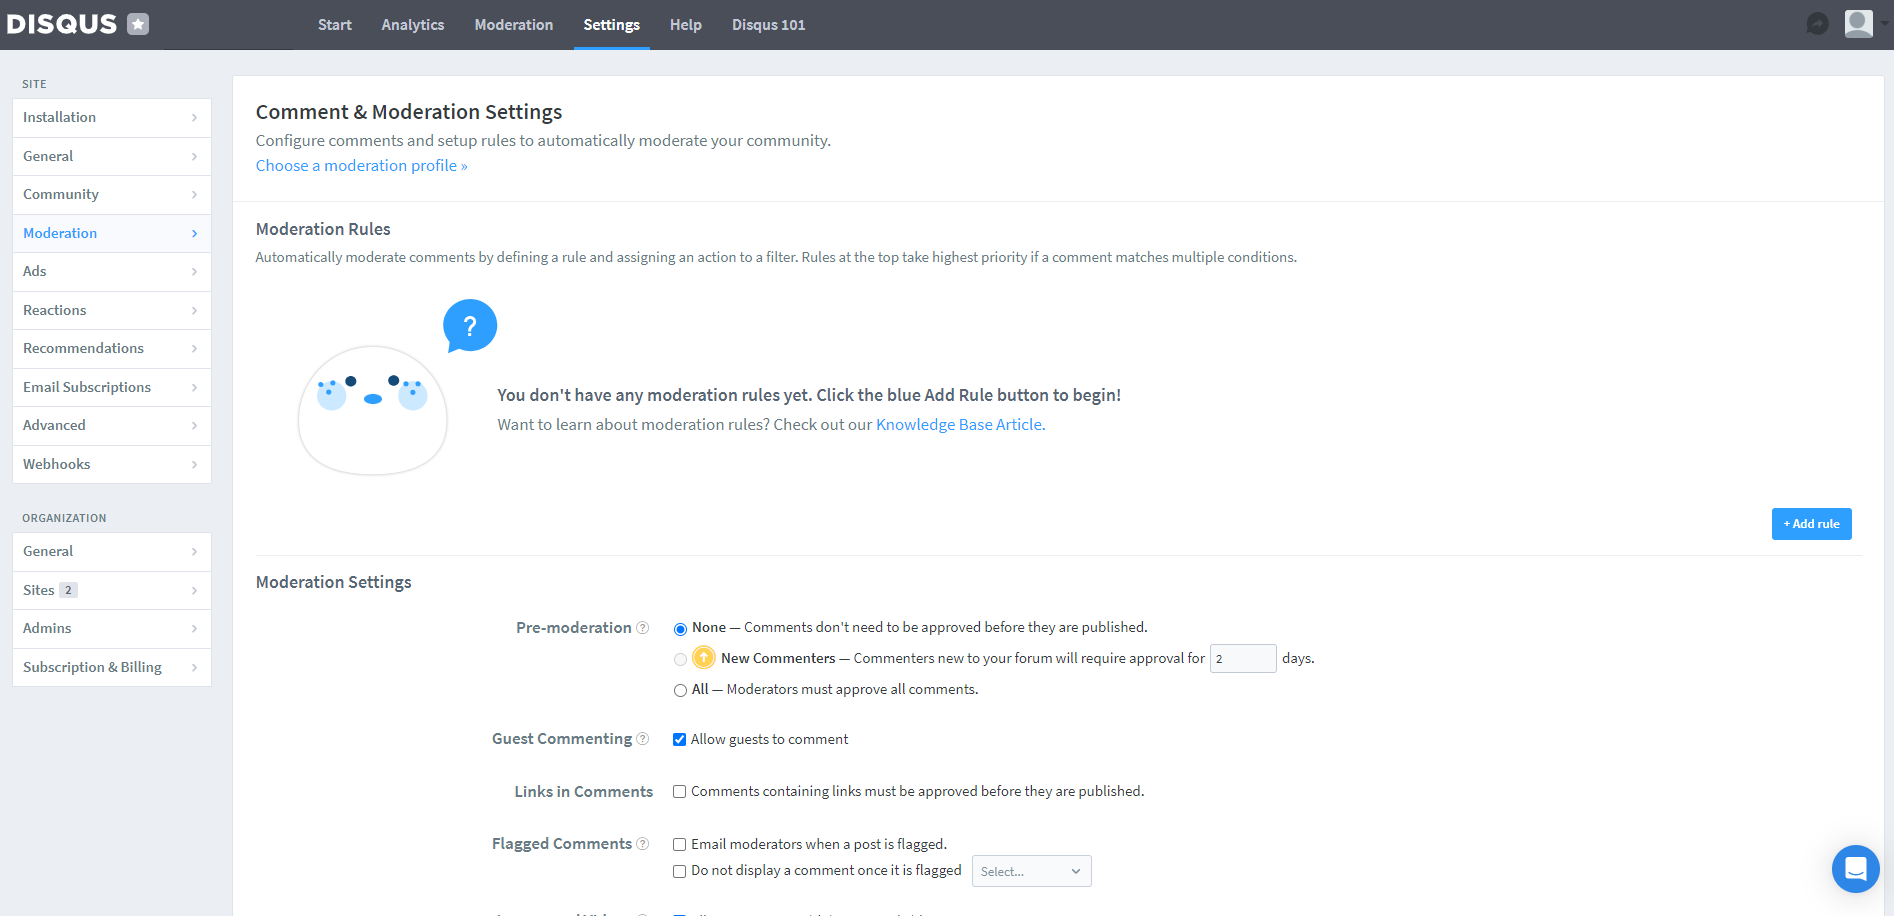 Comment and moderation settings page in the Disqus dashboard